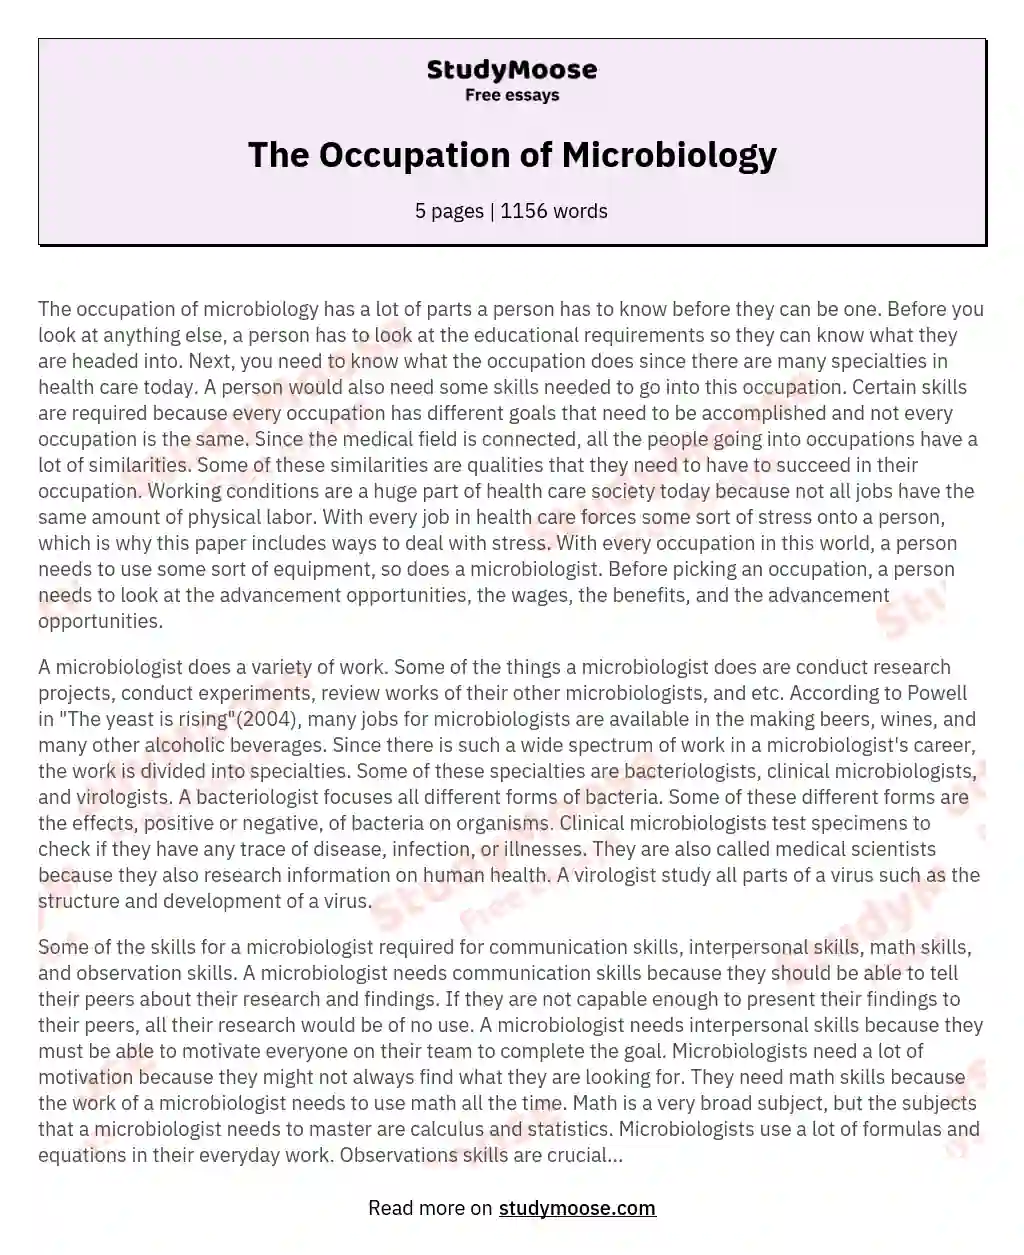 The Occupation of Microbiology essay